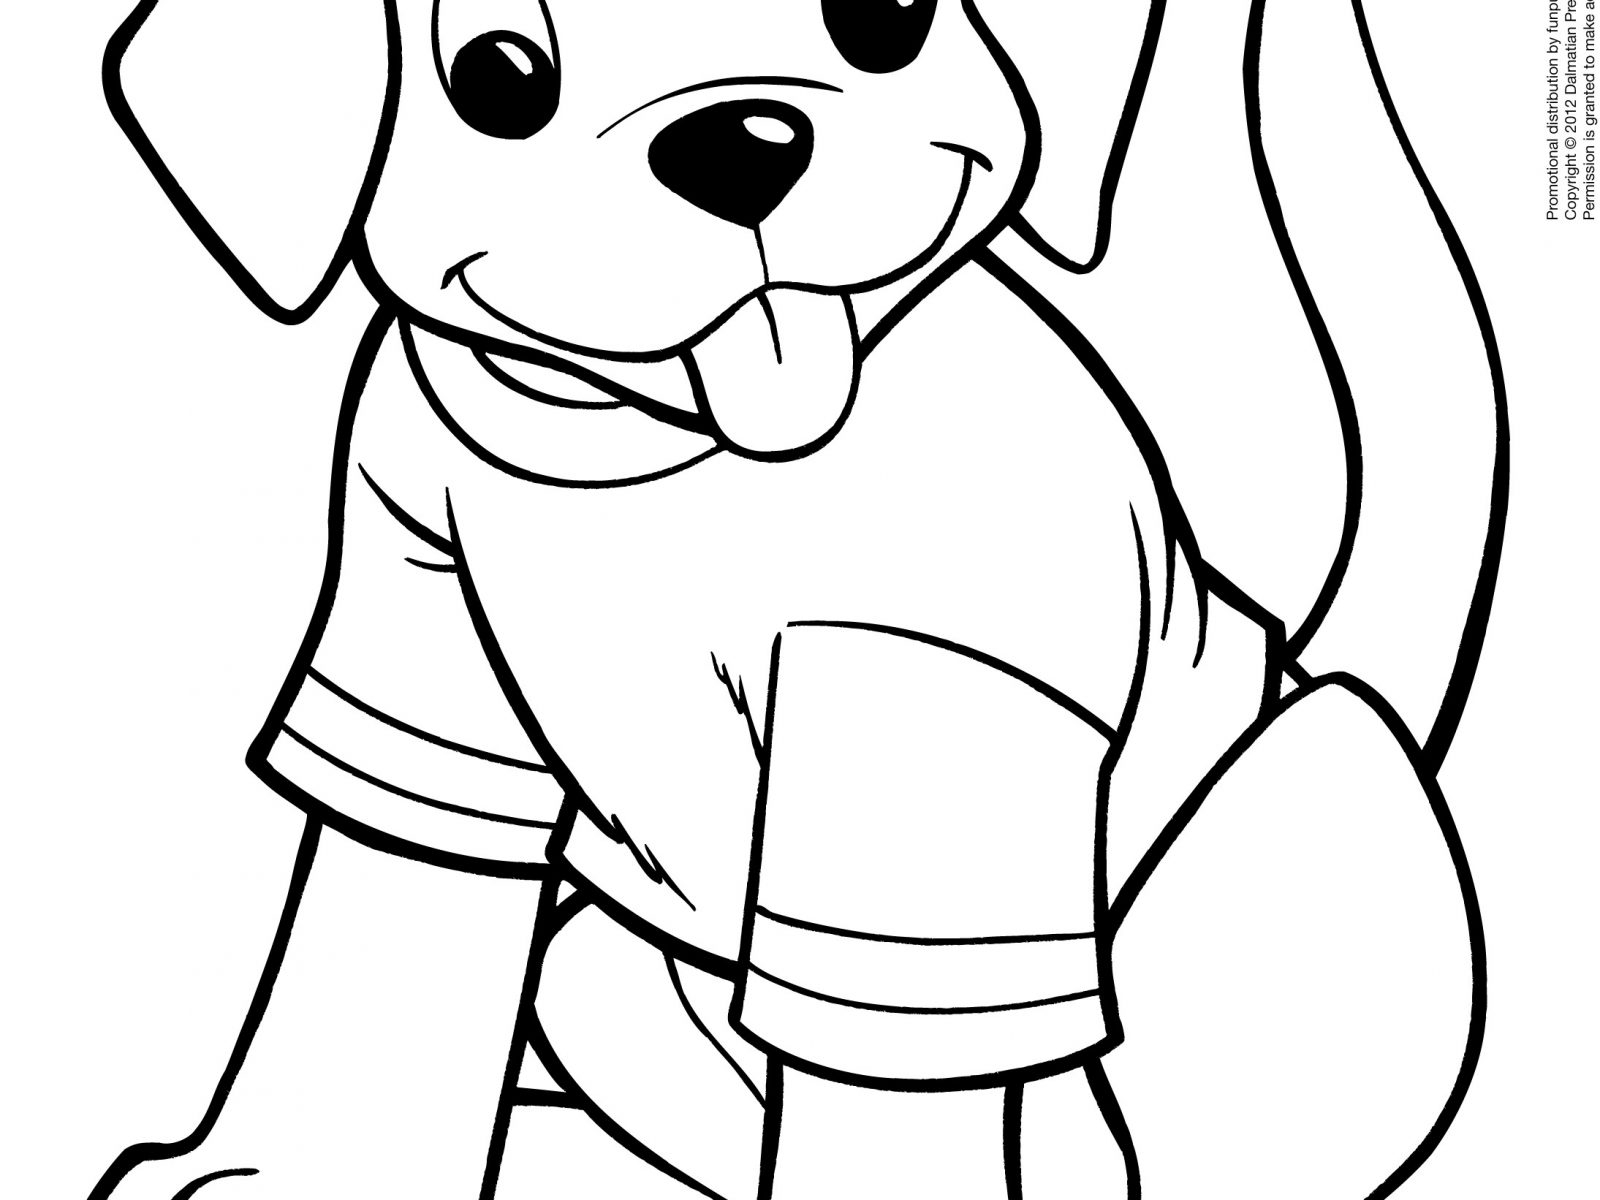 Coloring page loving cute dog